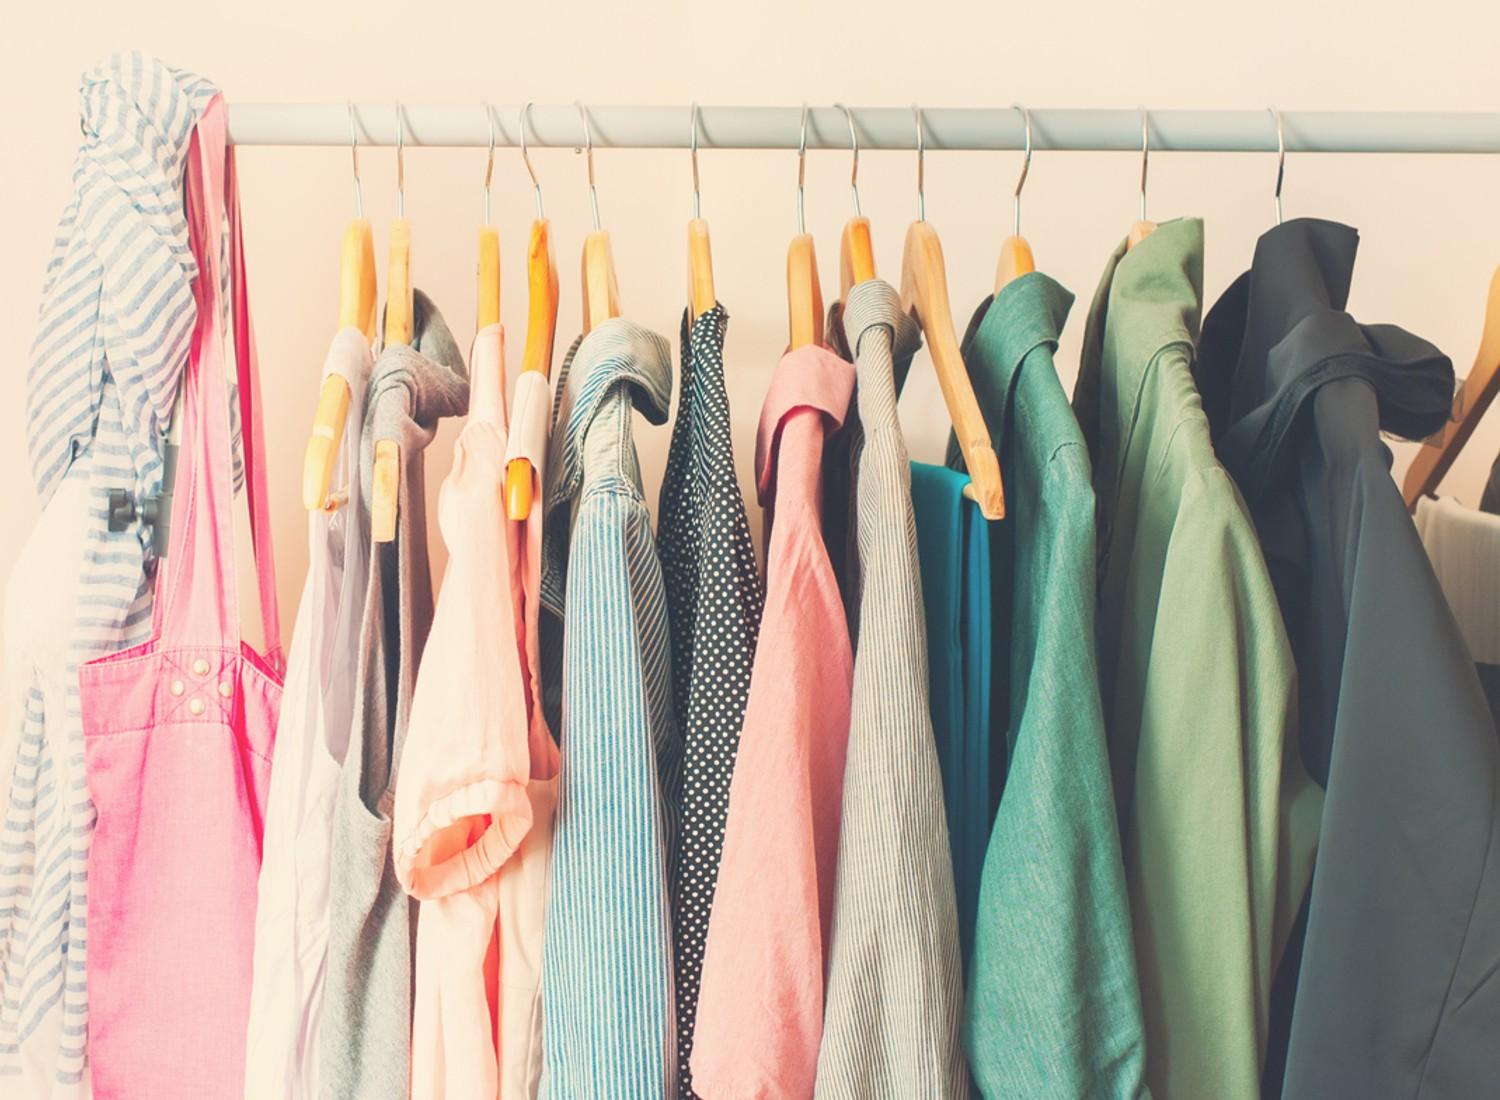 Women's summer clothes hanging in a closet.